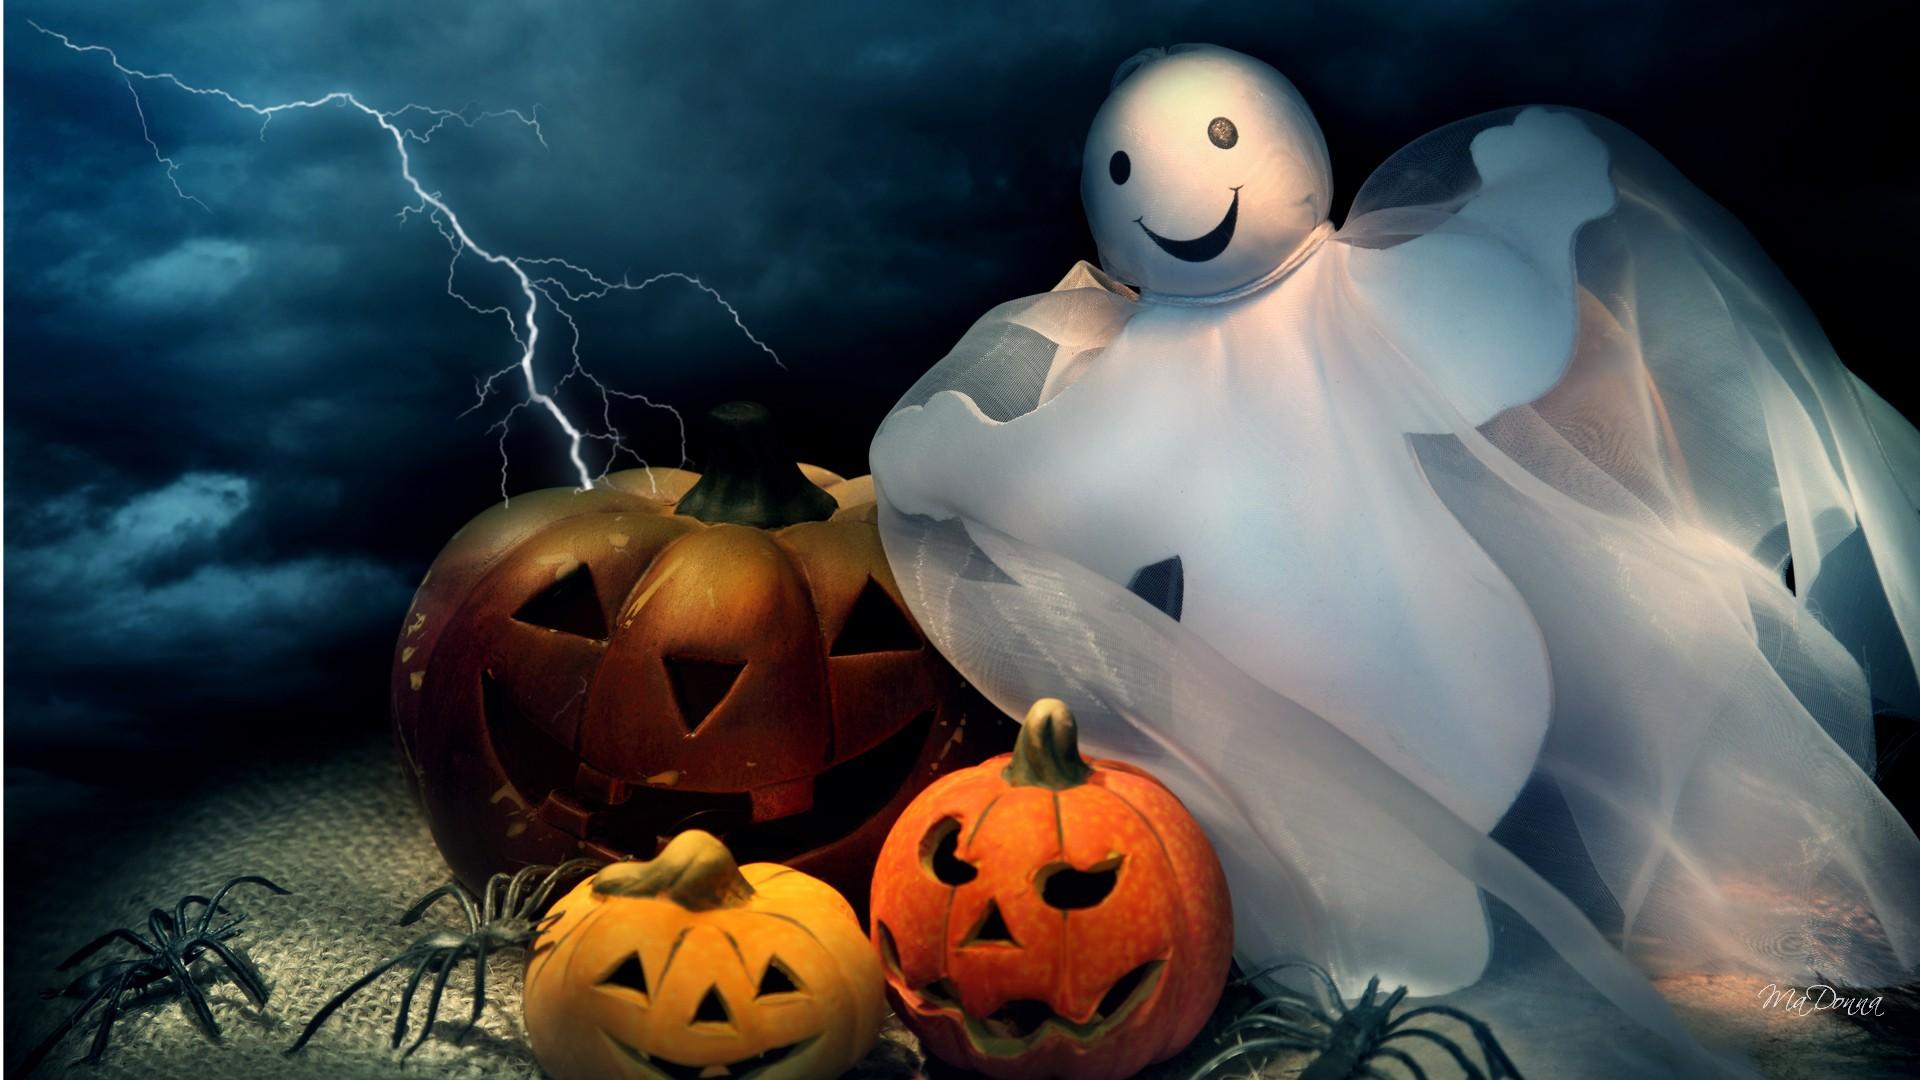 Halloween Full HD Wallpaper and Background Image | 1920x1080 | ID:445603